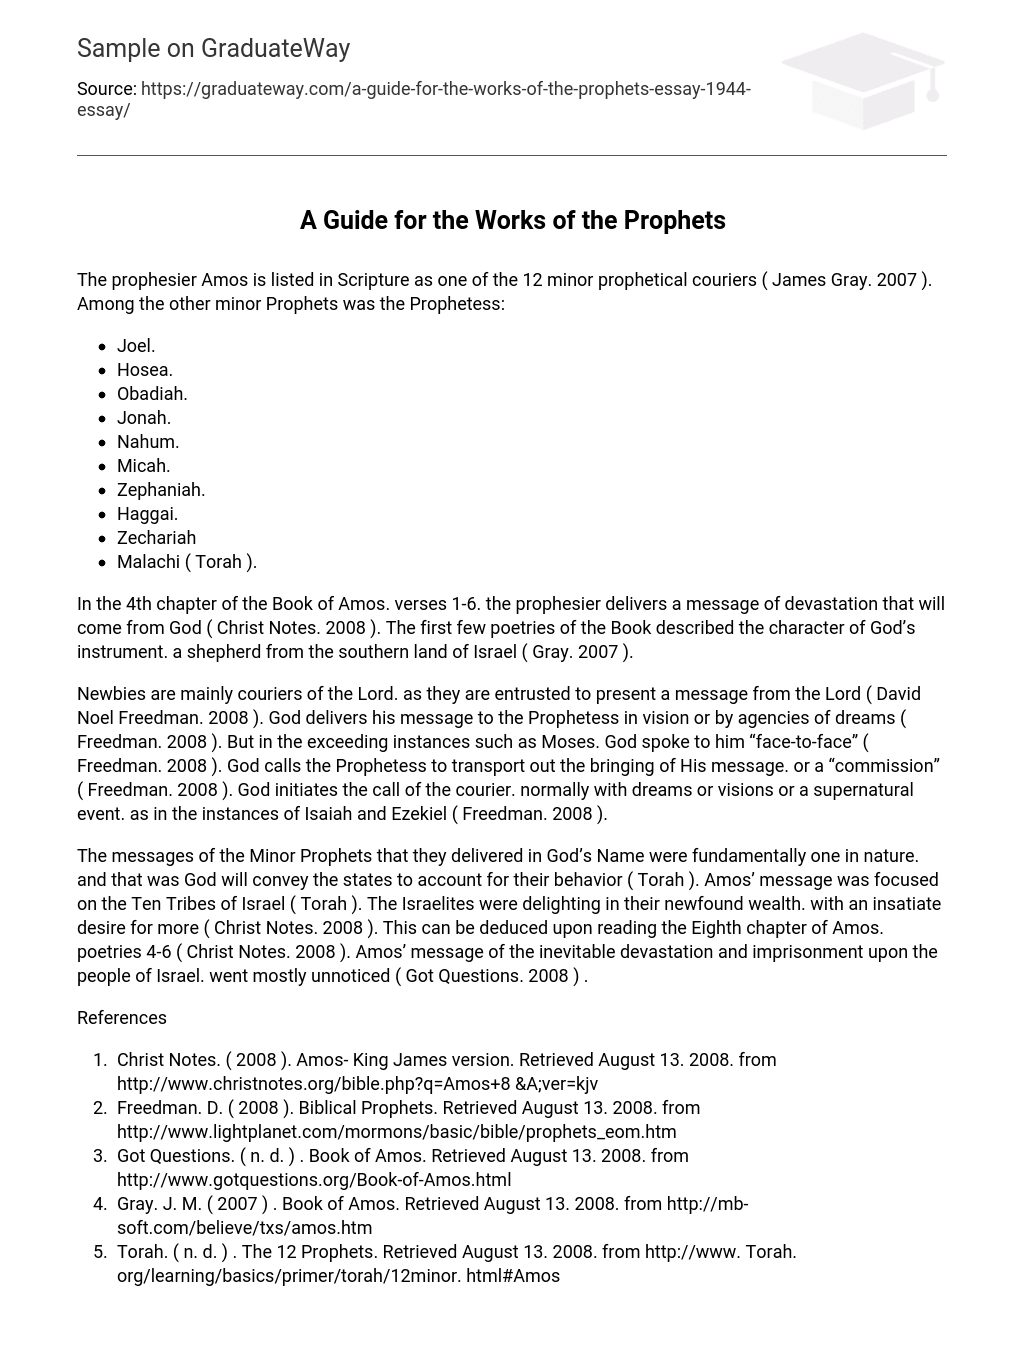 A Guide for the Works of the Prophets